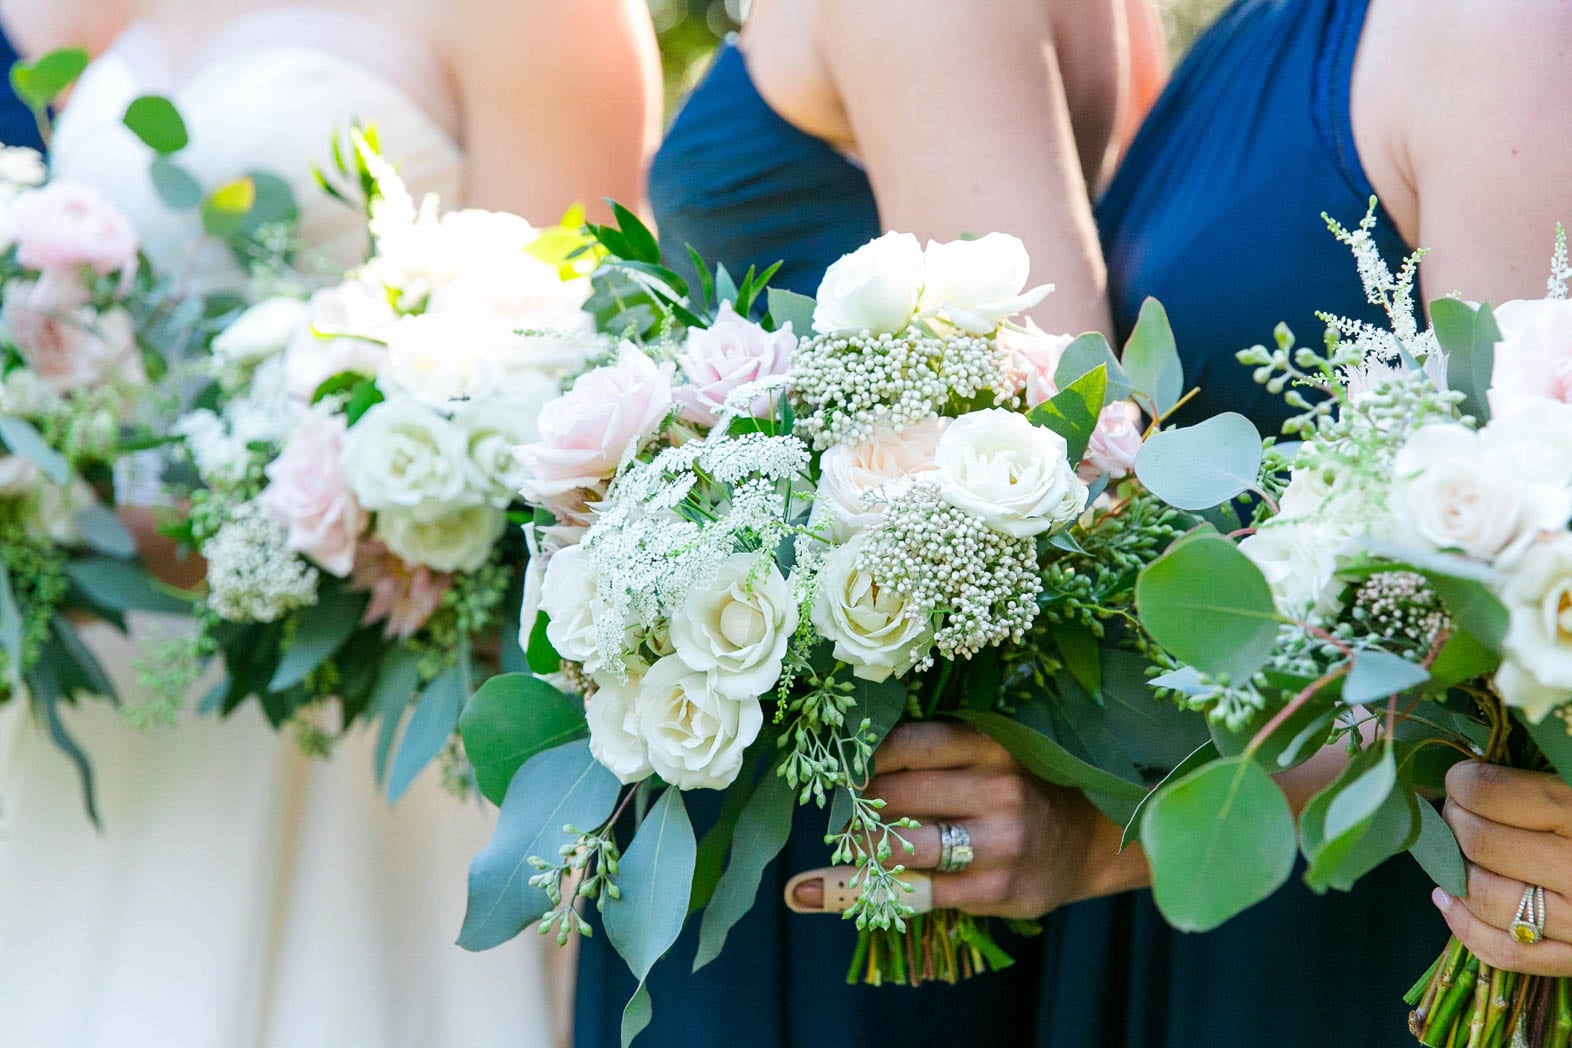 Katie + Brad // Classic Navy + White Fall Wedding at Legare Waring ...